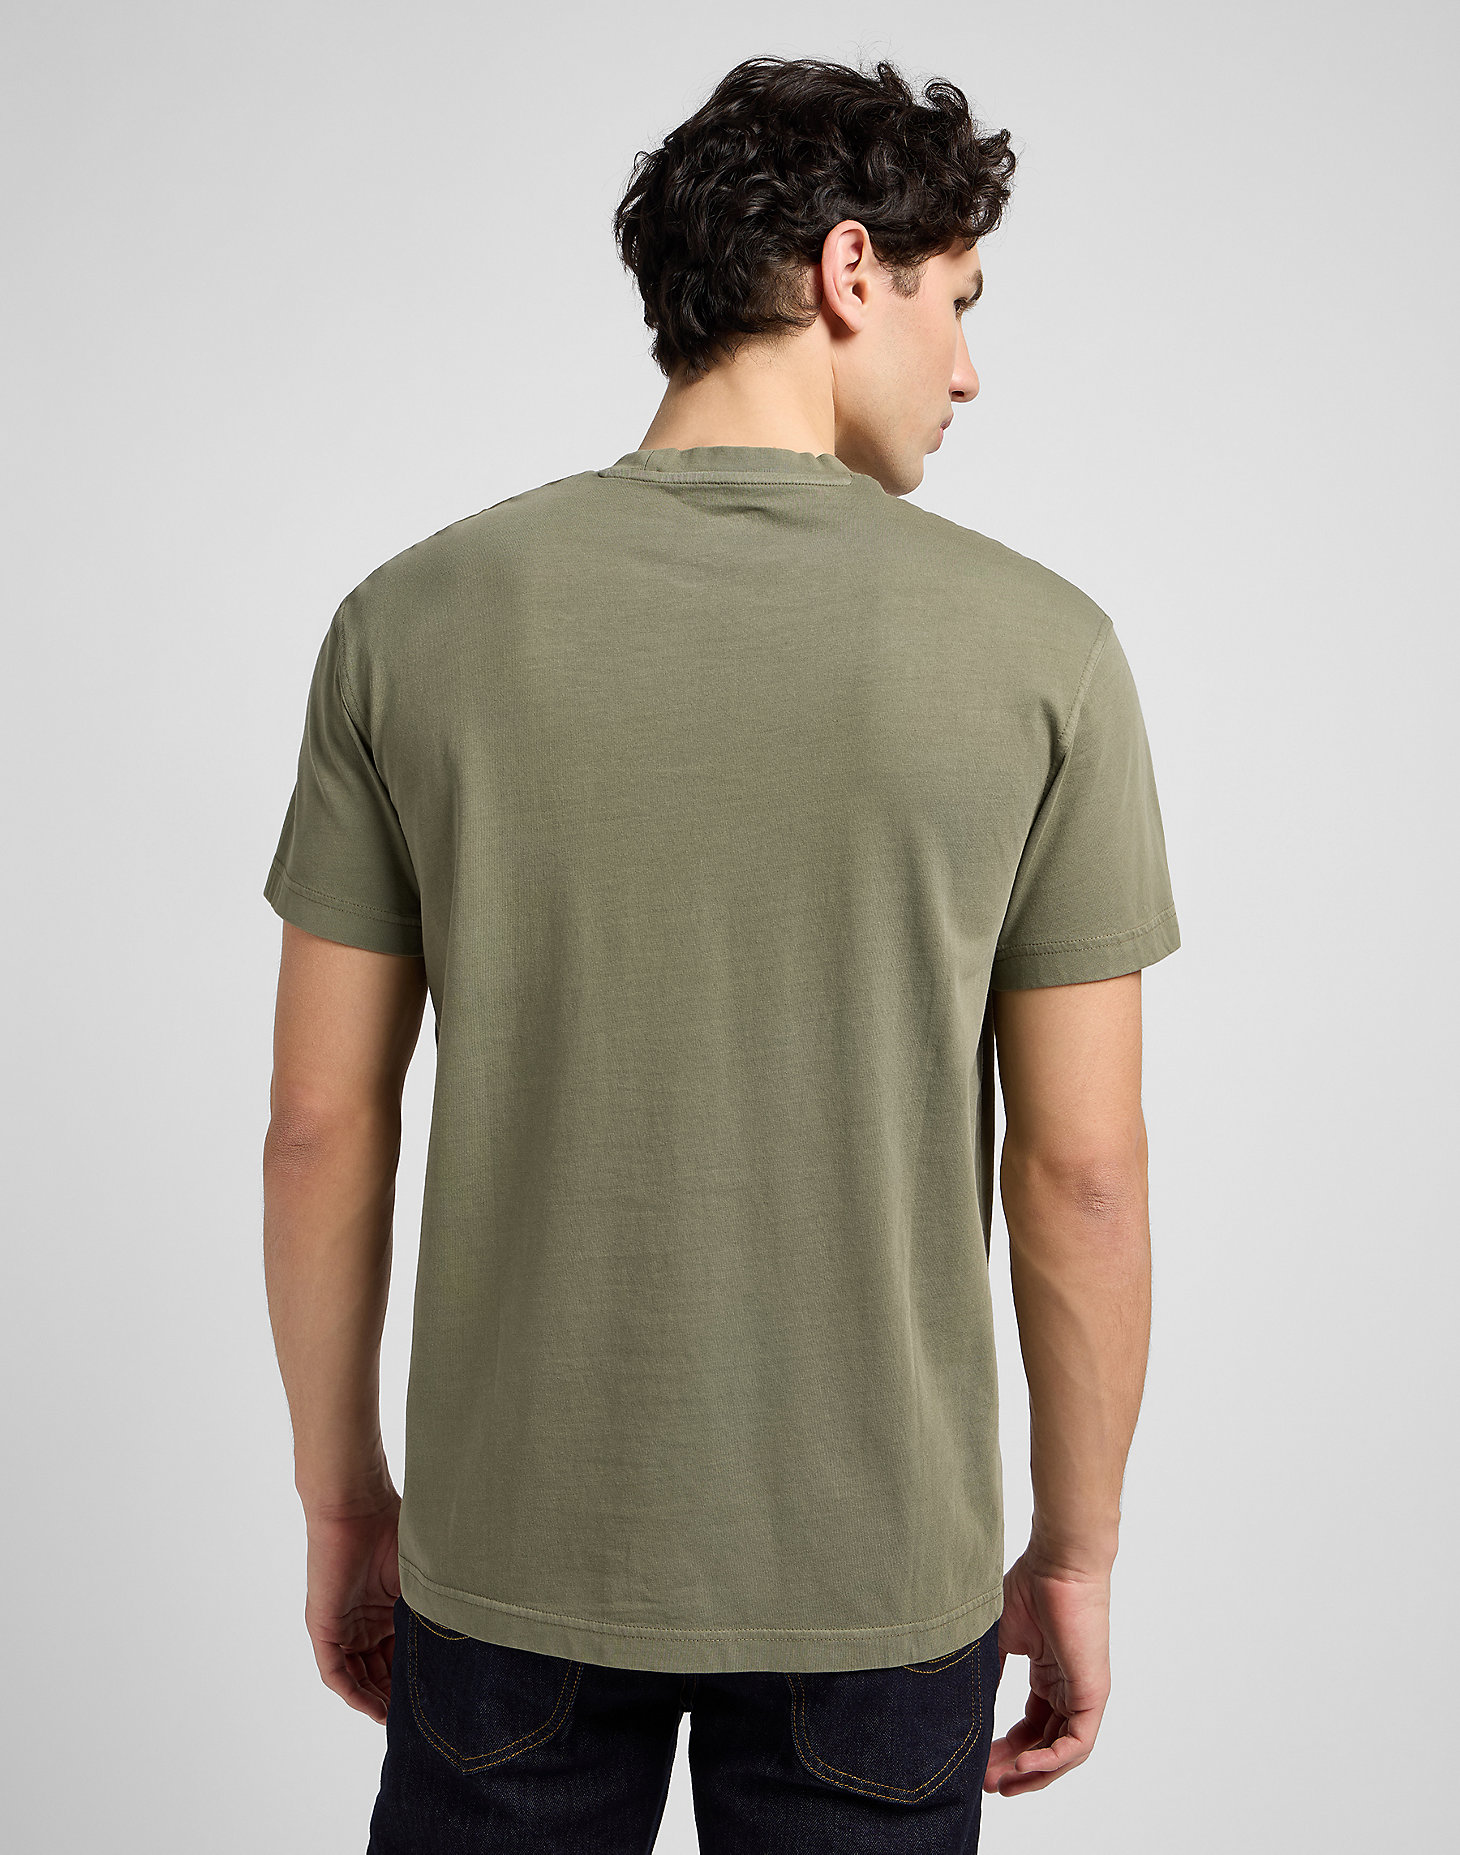 Relaxed Pocket Tee in Olive Grove alternative view 1